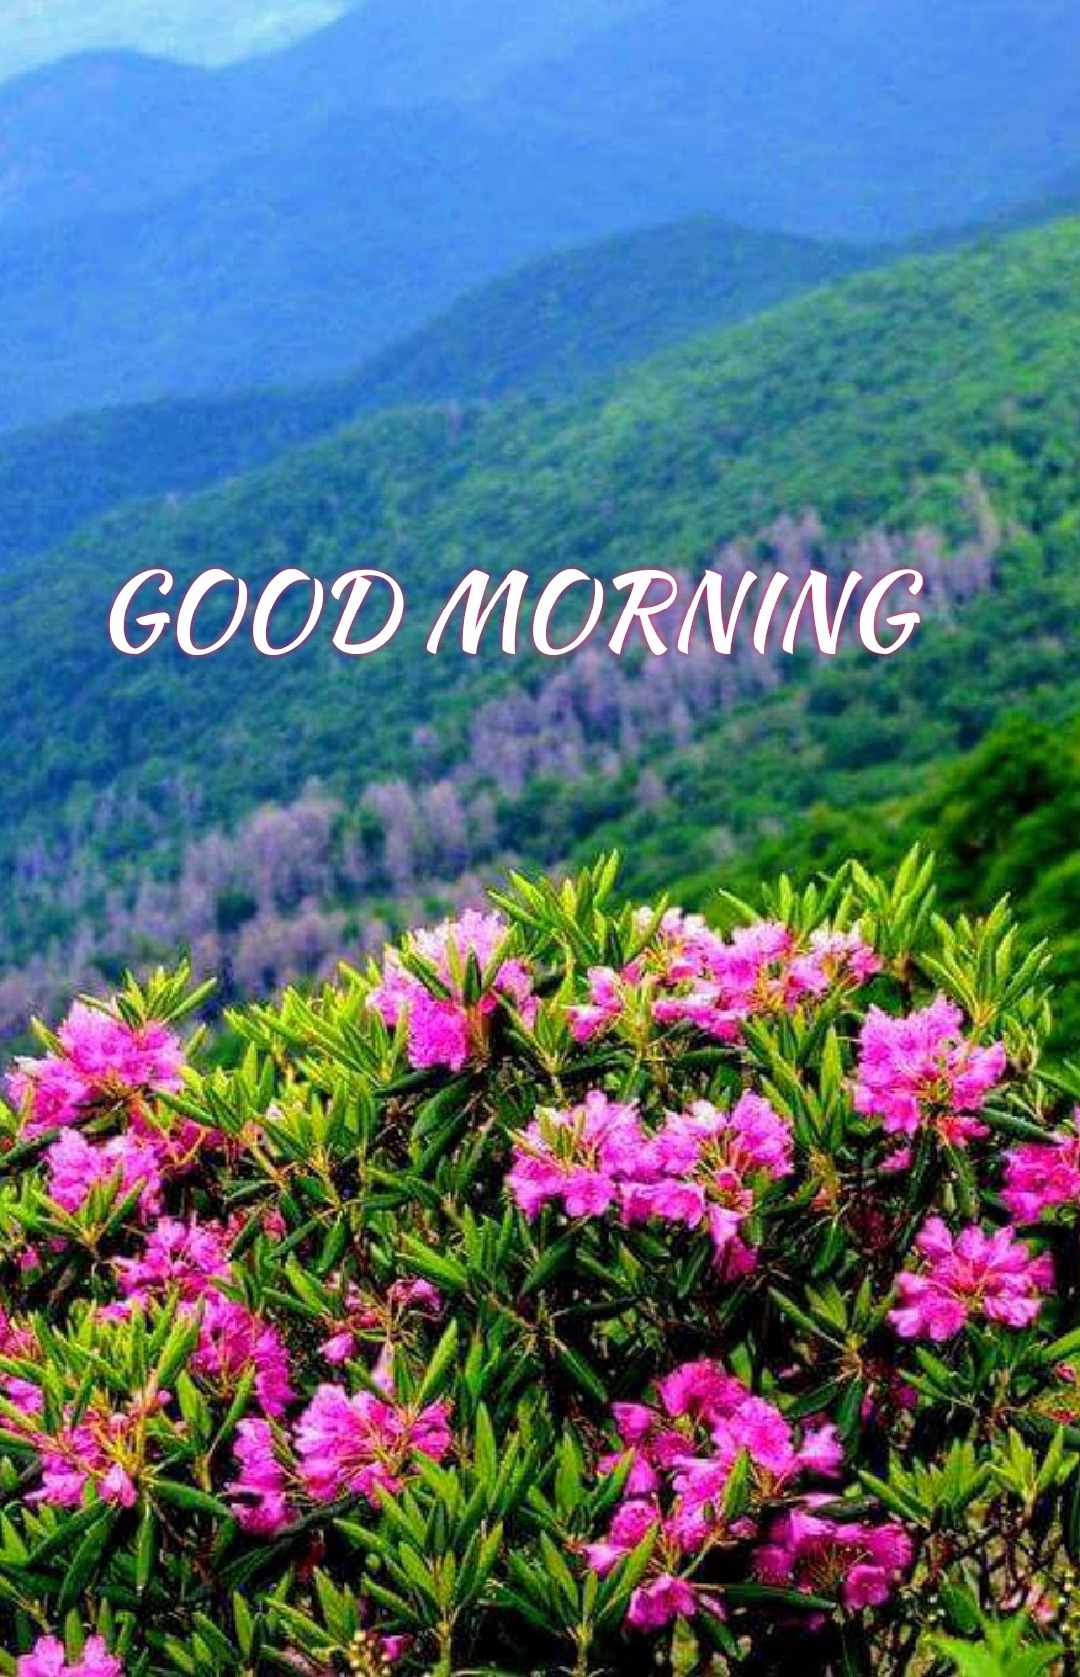 Beautiful Good Morning Picture - DesiComments.com